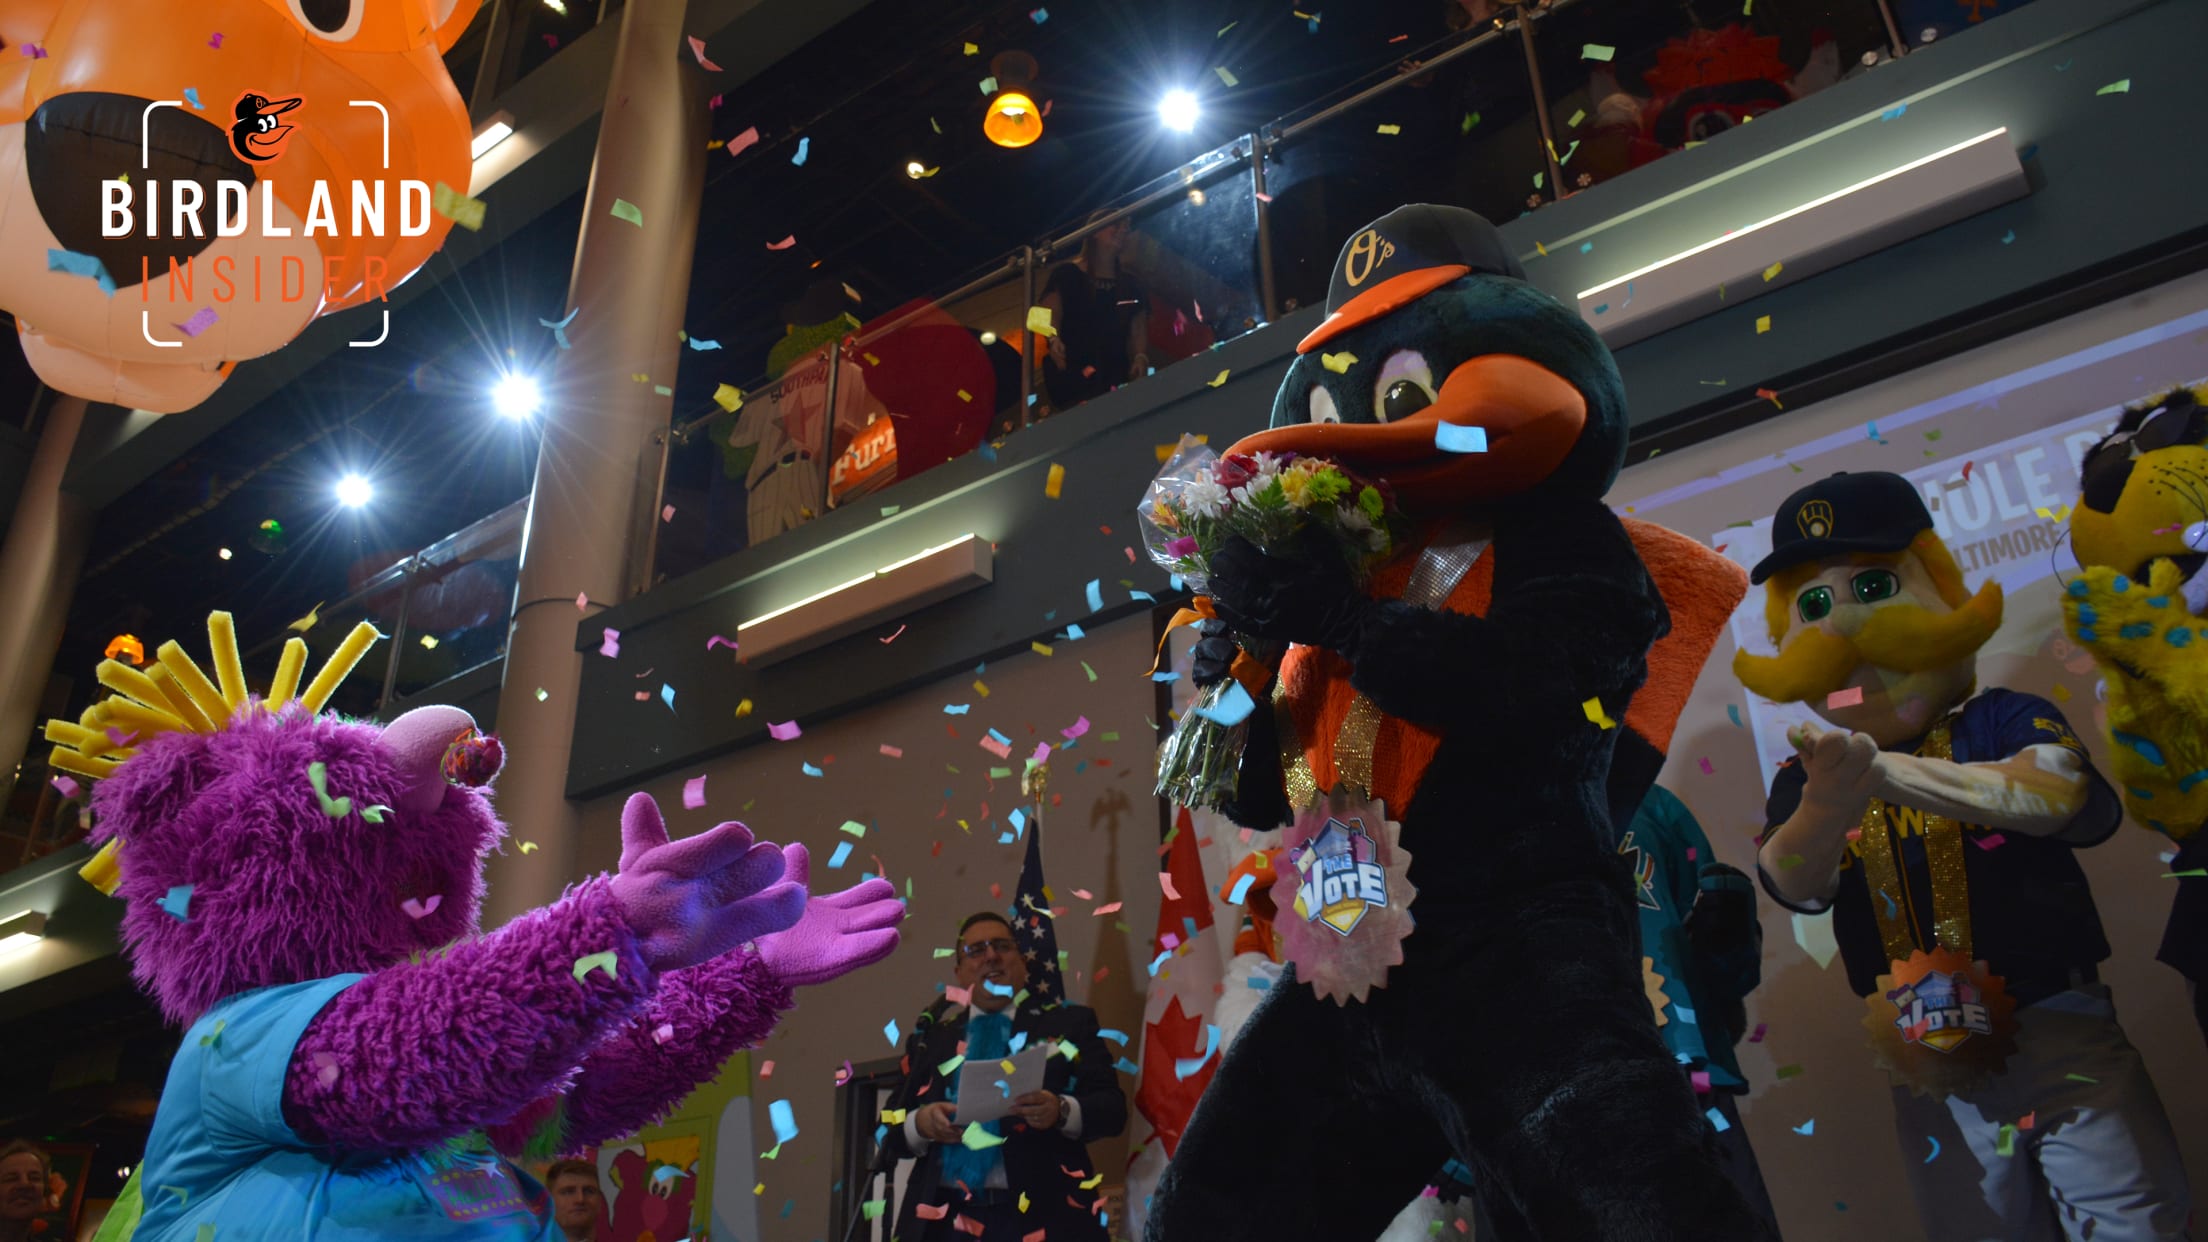 The Oriole Bird to join the Mascot Hall of Fame - WTOP News